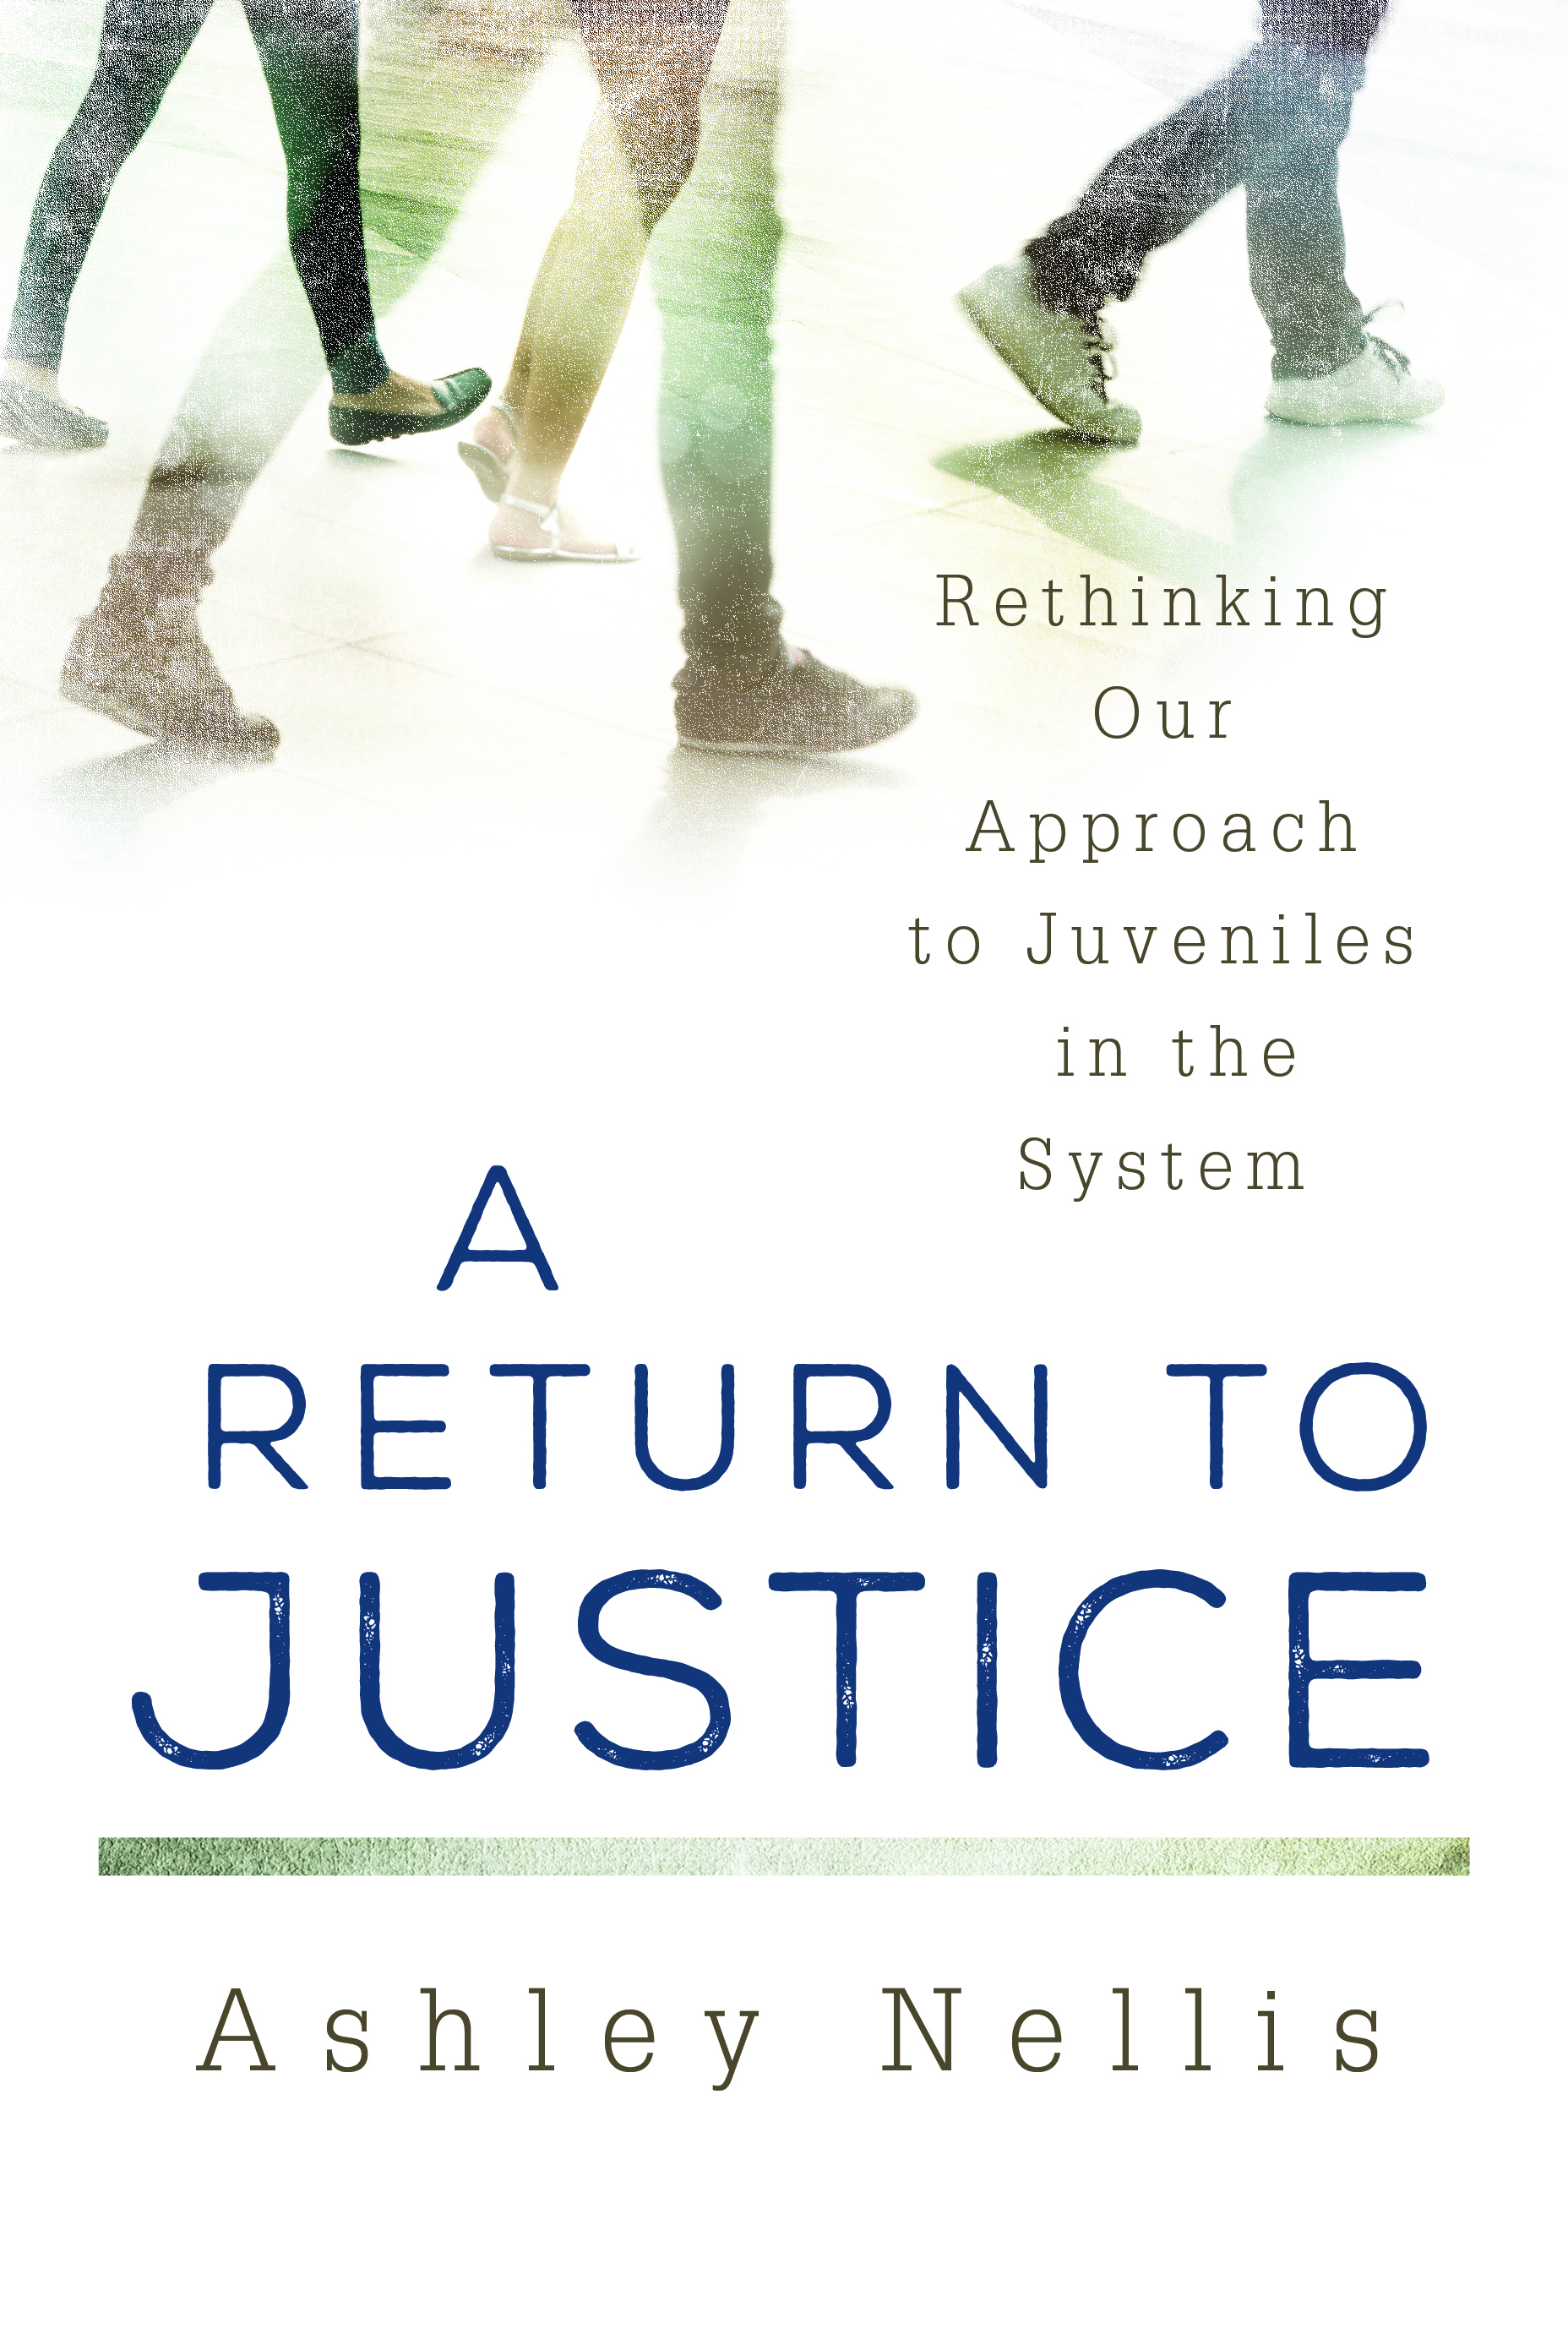 A Return to Justice: Rethinking our Approach to Juveniles in the System